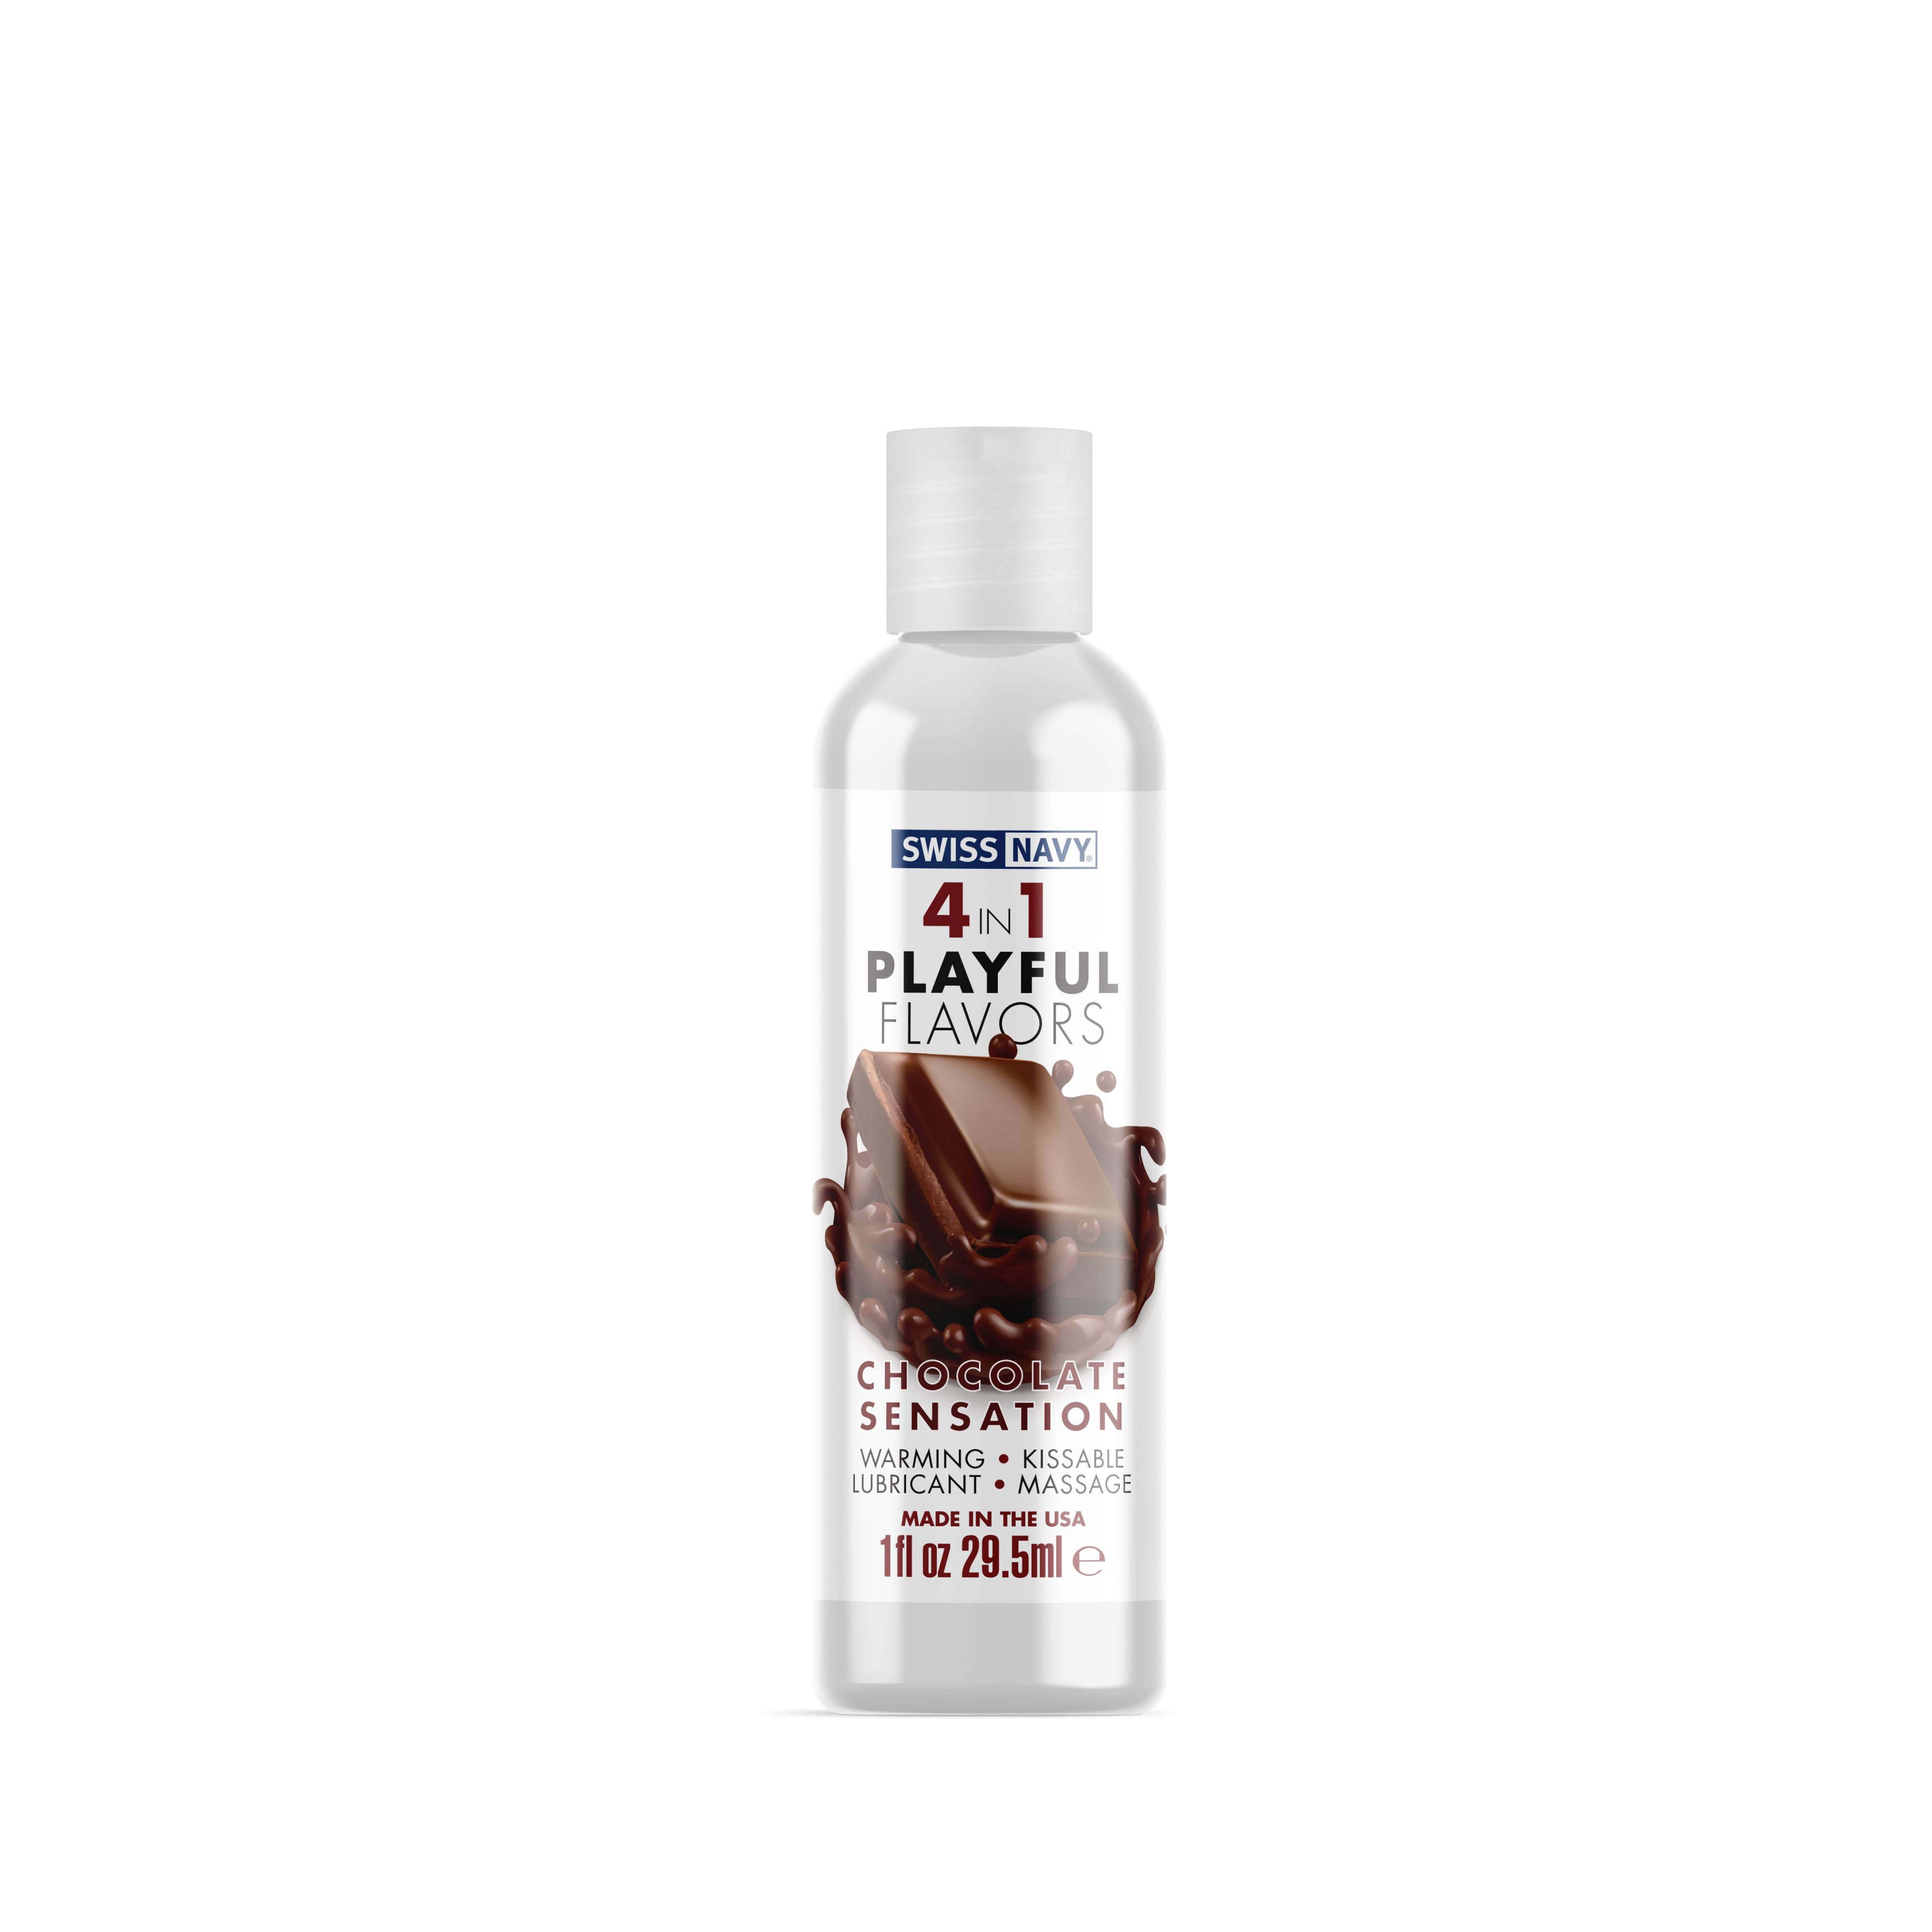 SWISS NAVY 4 IN 1 PLAYFUL FLAVORS CHOCOLATE SENSATION 1OZ - Click Image to Close